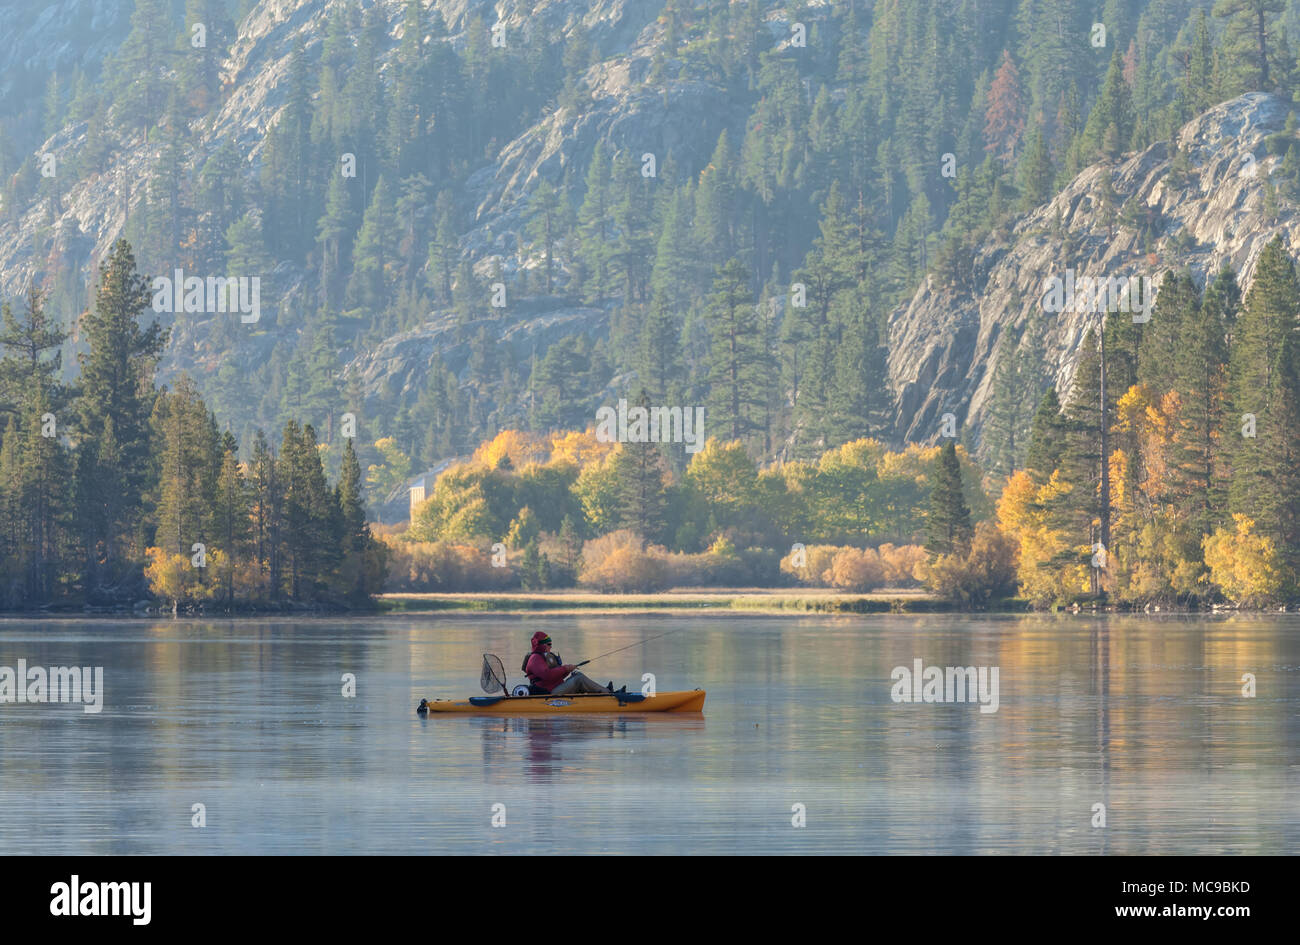 A fisherman was canoeing in Silver Lake on an early autumn morning, June Lake Loop, June Lake, California, United States. Stock Photo